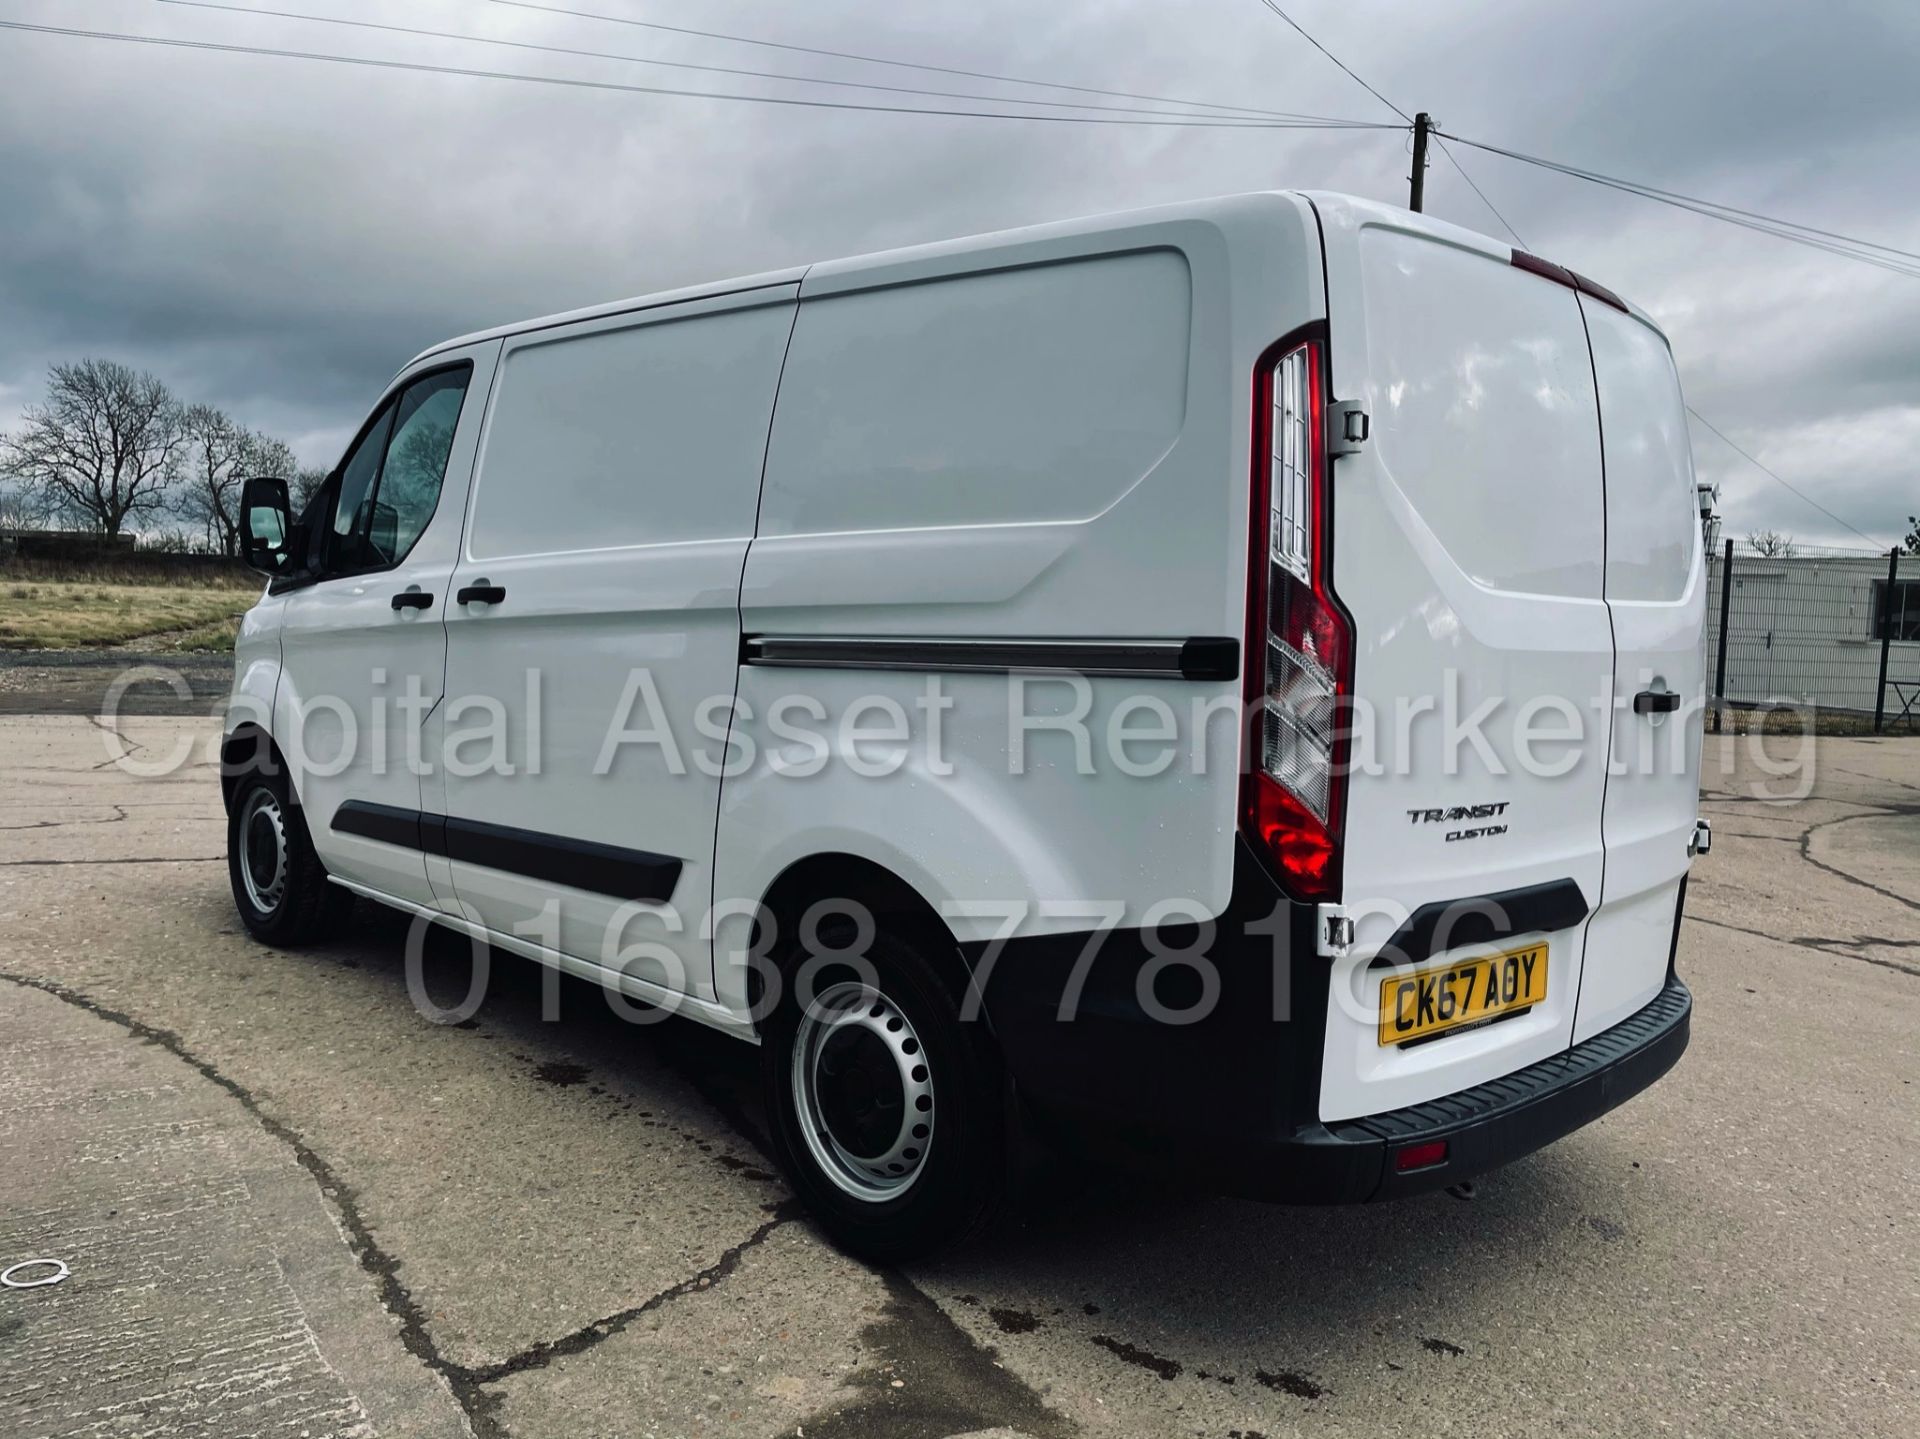 FORD TRANSIT CUSTOM 270 *SWB - PANEL VAN* (2018 - EURO 6) '2.0 TDCI - 6 SPEED' (1 OWNER FROM NEW) - Image 10 of 37